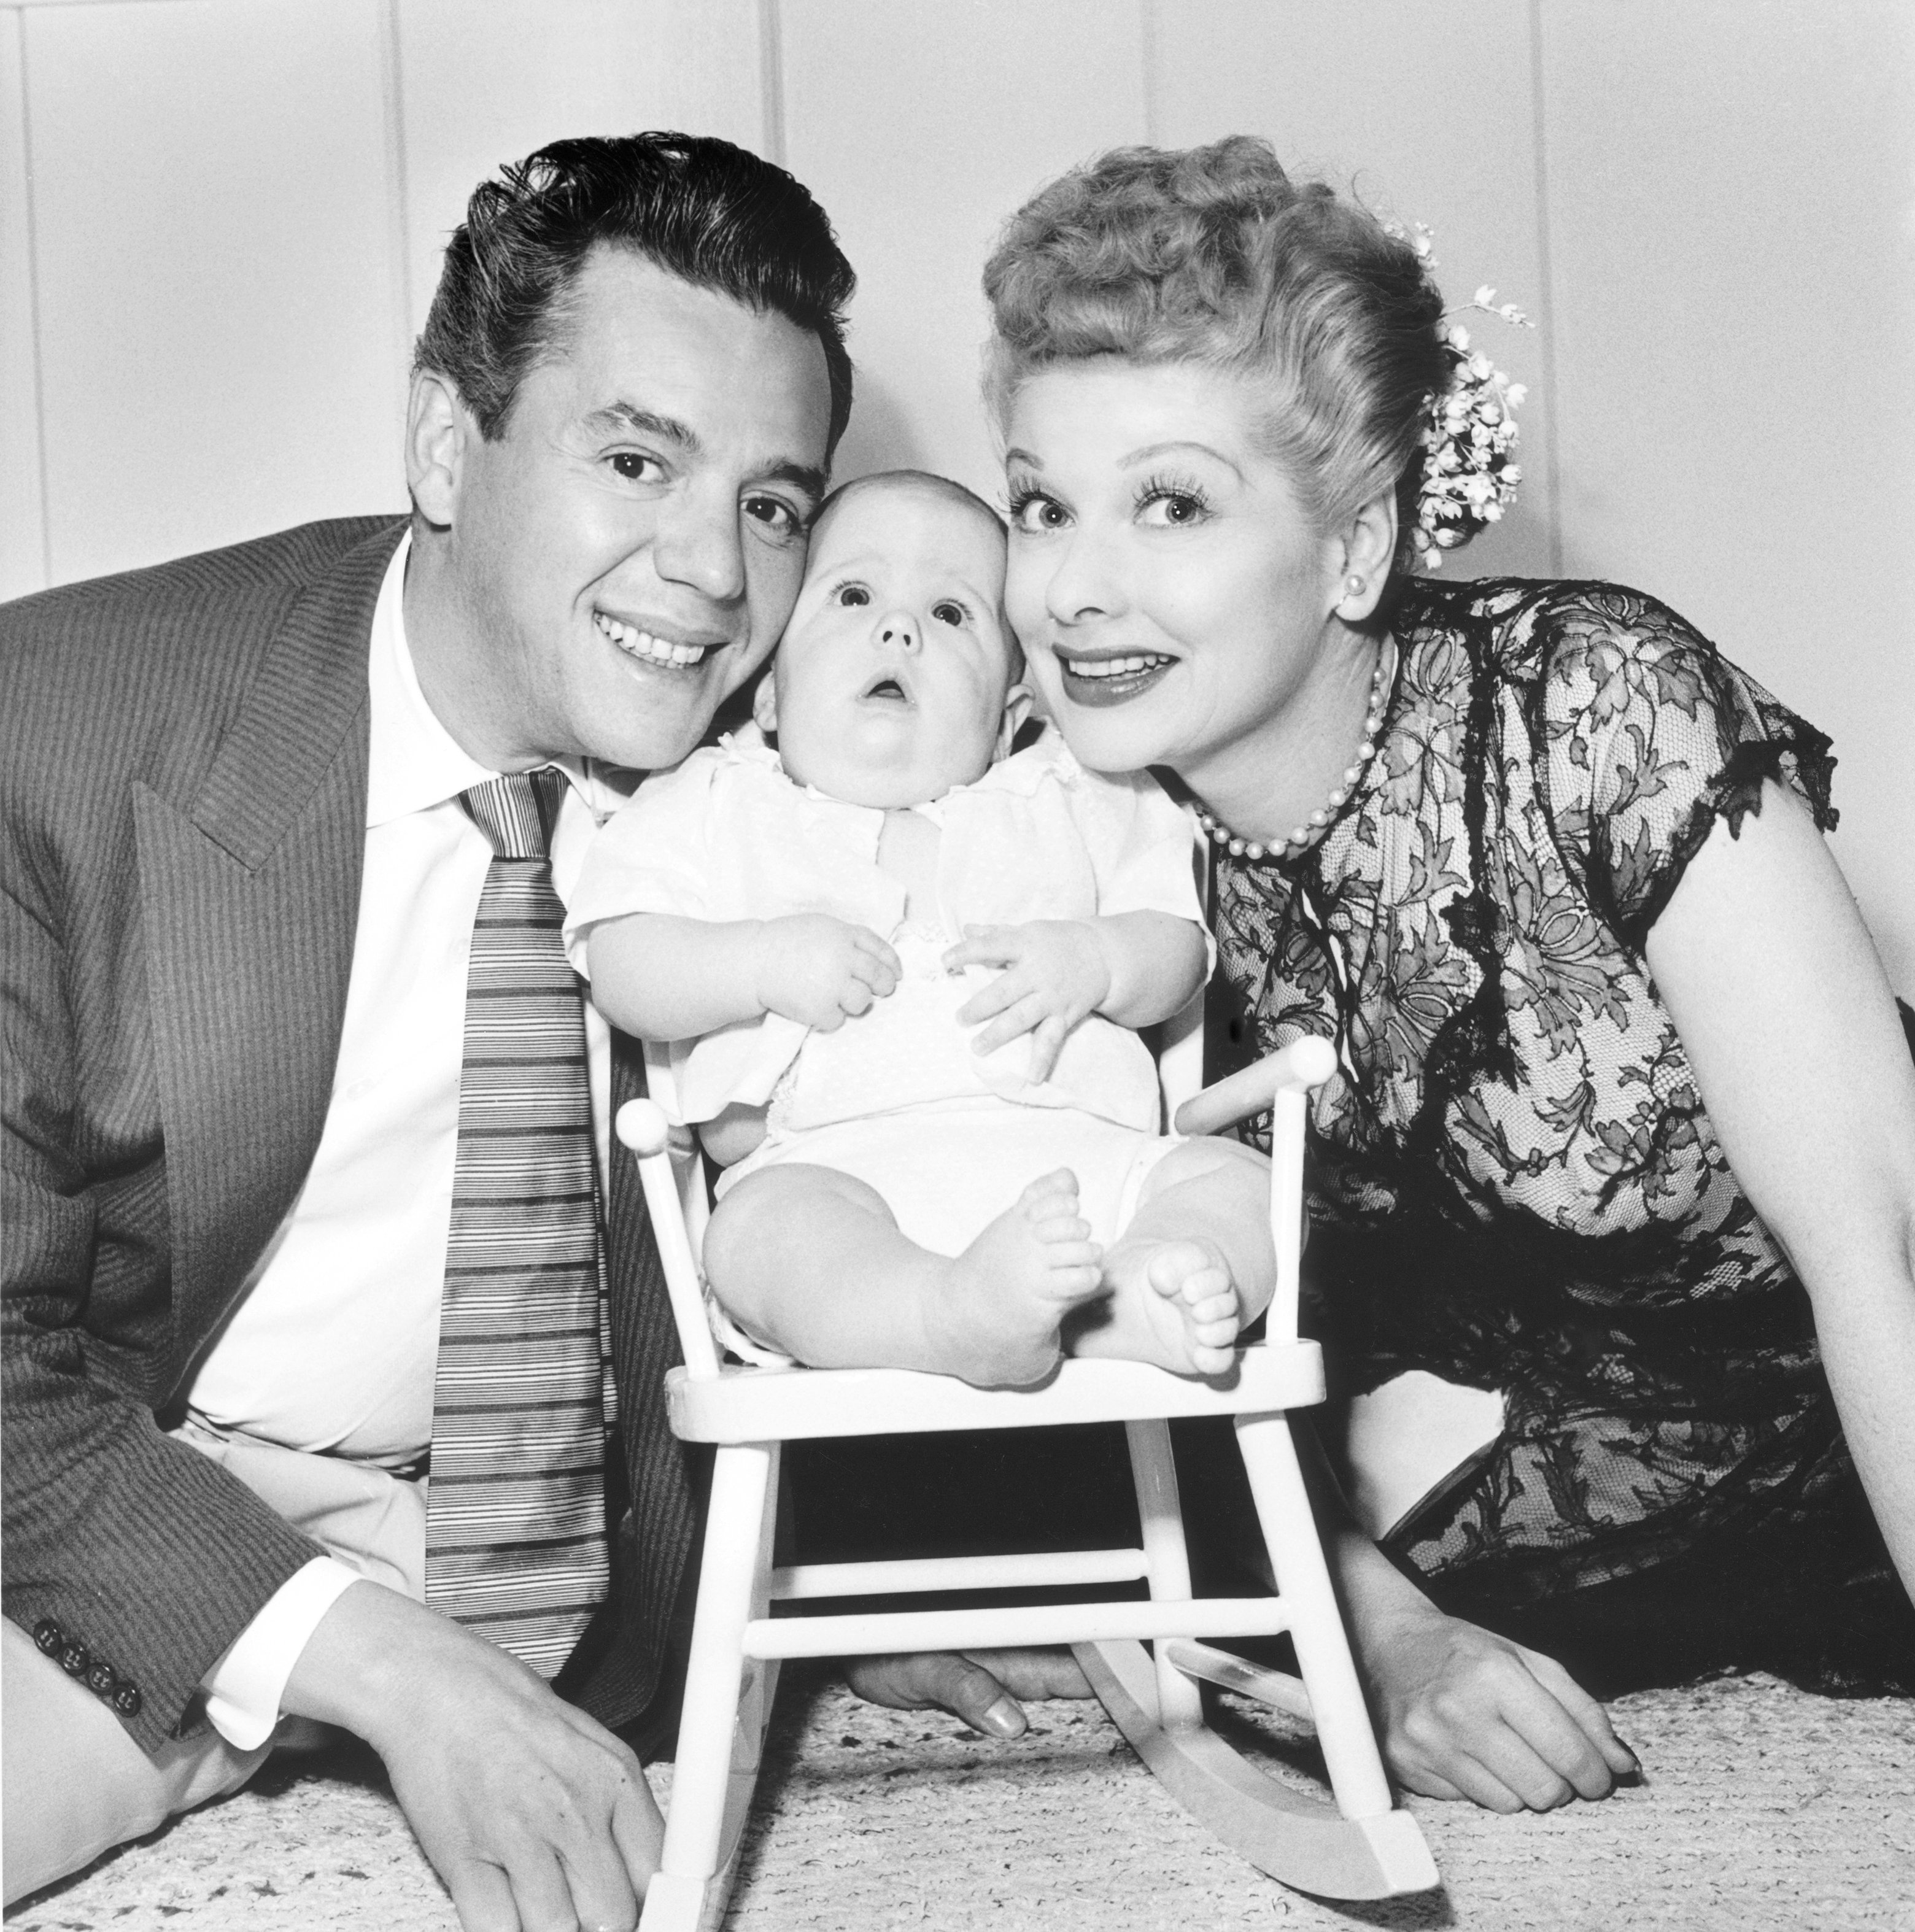 Desi Arnaz and Lucille Ball with their son Desi Arnaz Jr. at their home in California in 1953 | Source: Getty Images